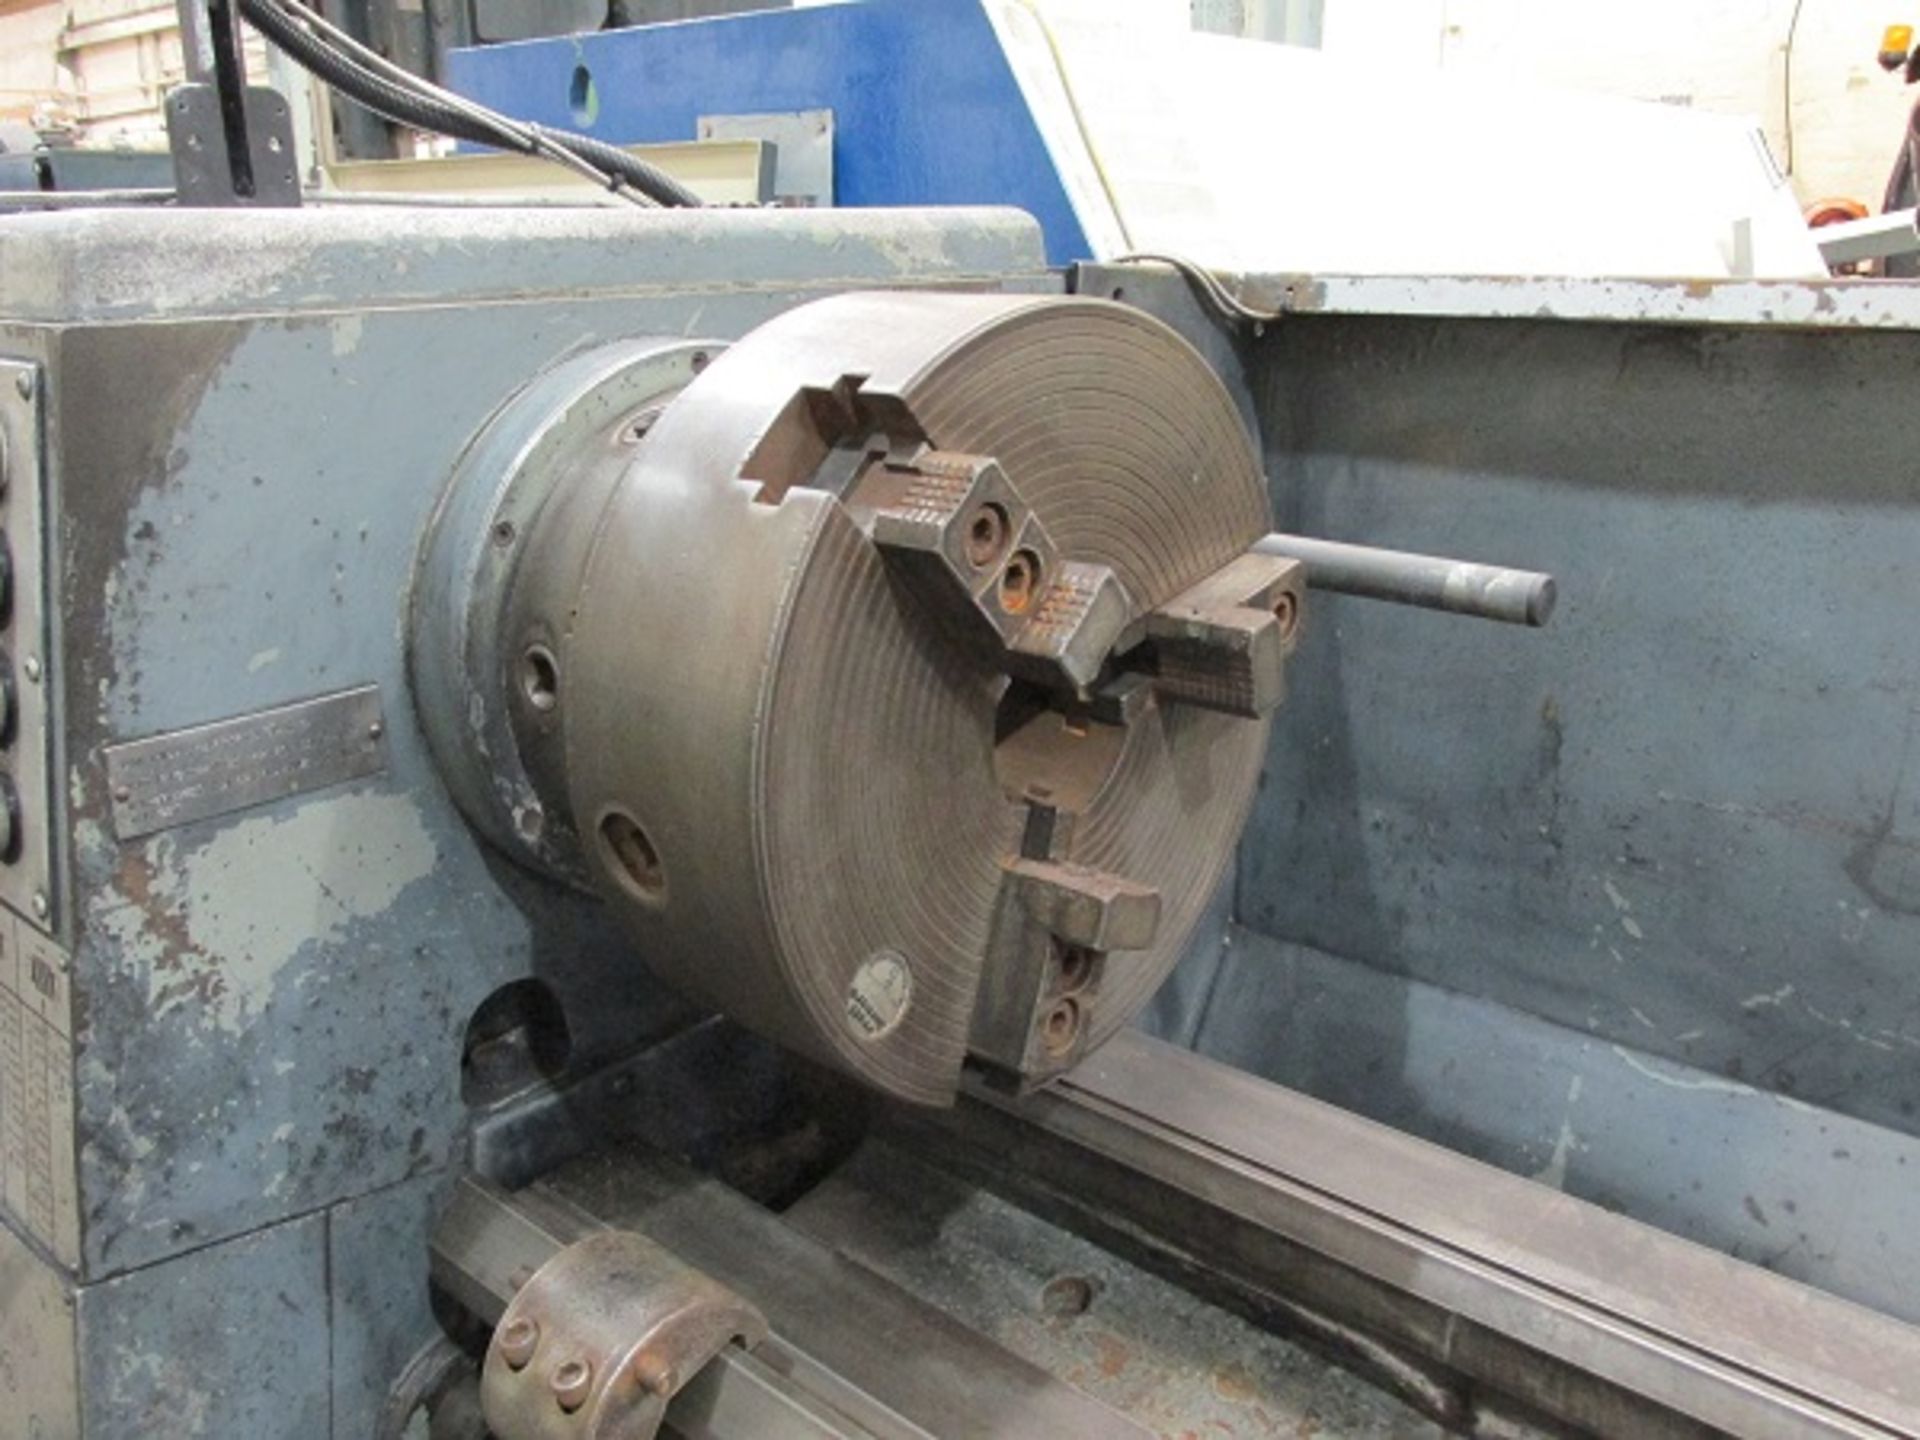 Colchester Mascot 1600 Gap Bed Lathe x 2000mm - Image 5 of 6